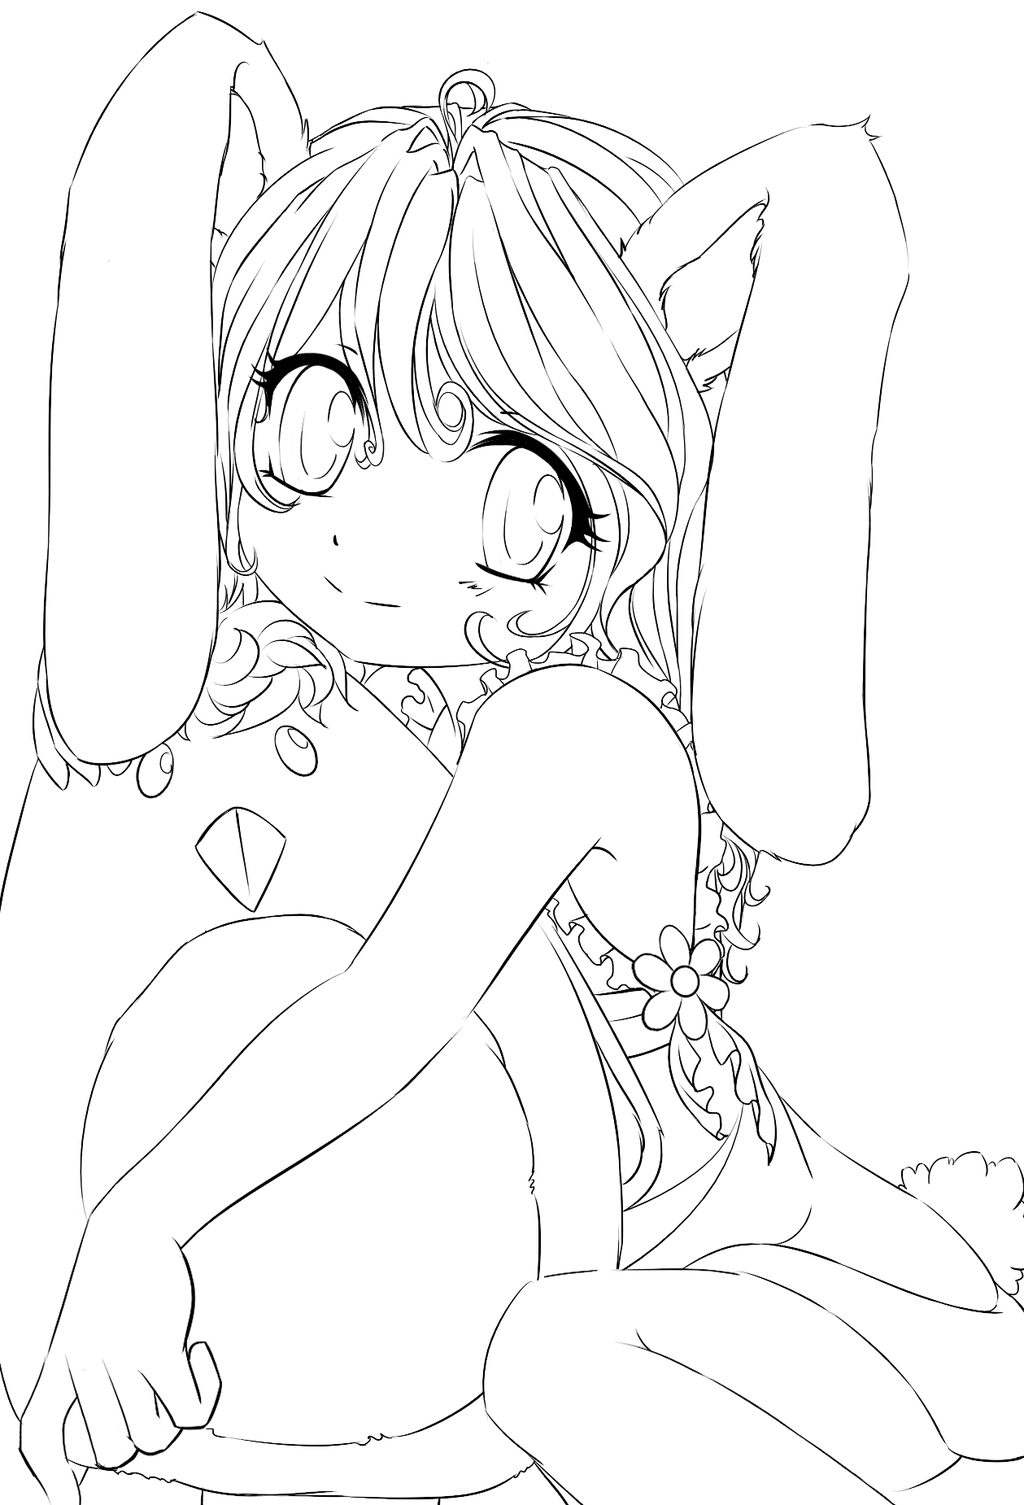 Anime Valentine Girl Coloring Pages - Coloring Pages For All Ages